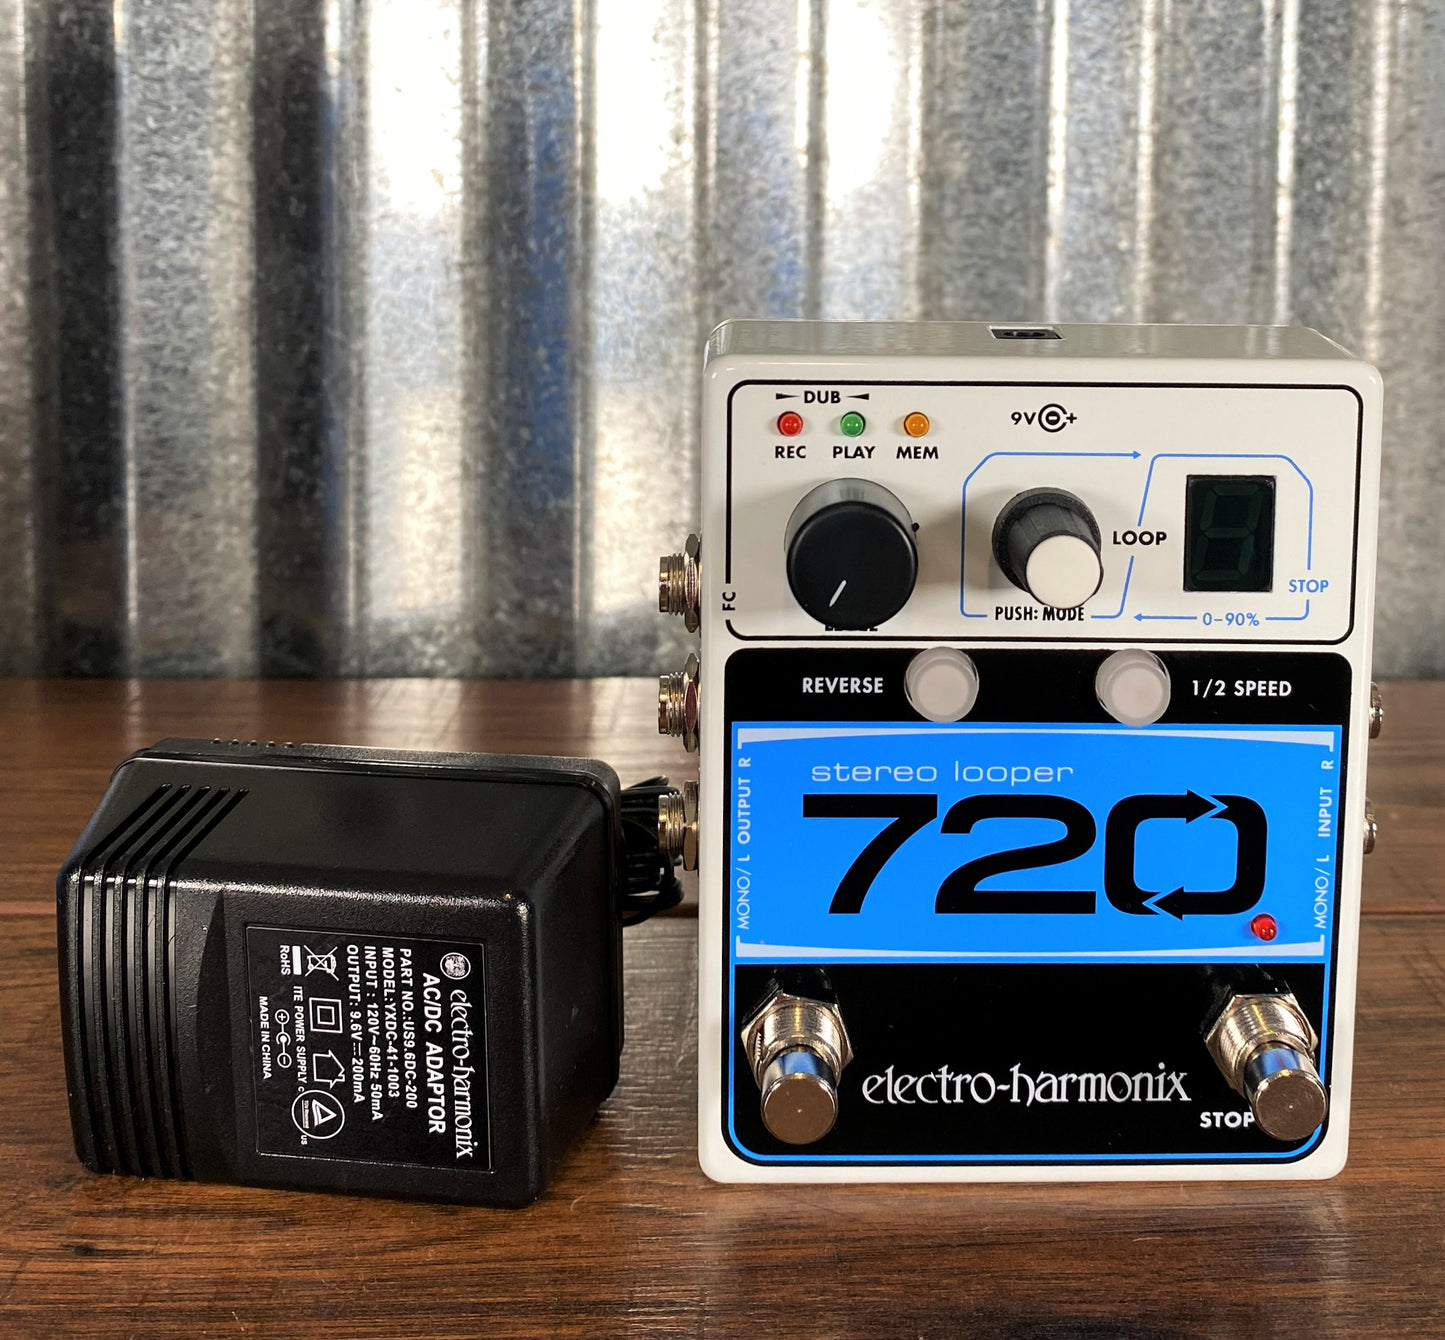 Electro-Harmonix EHX 720 Stereo Looper Guitar Effects Pedal & AC Adapter